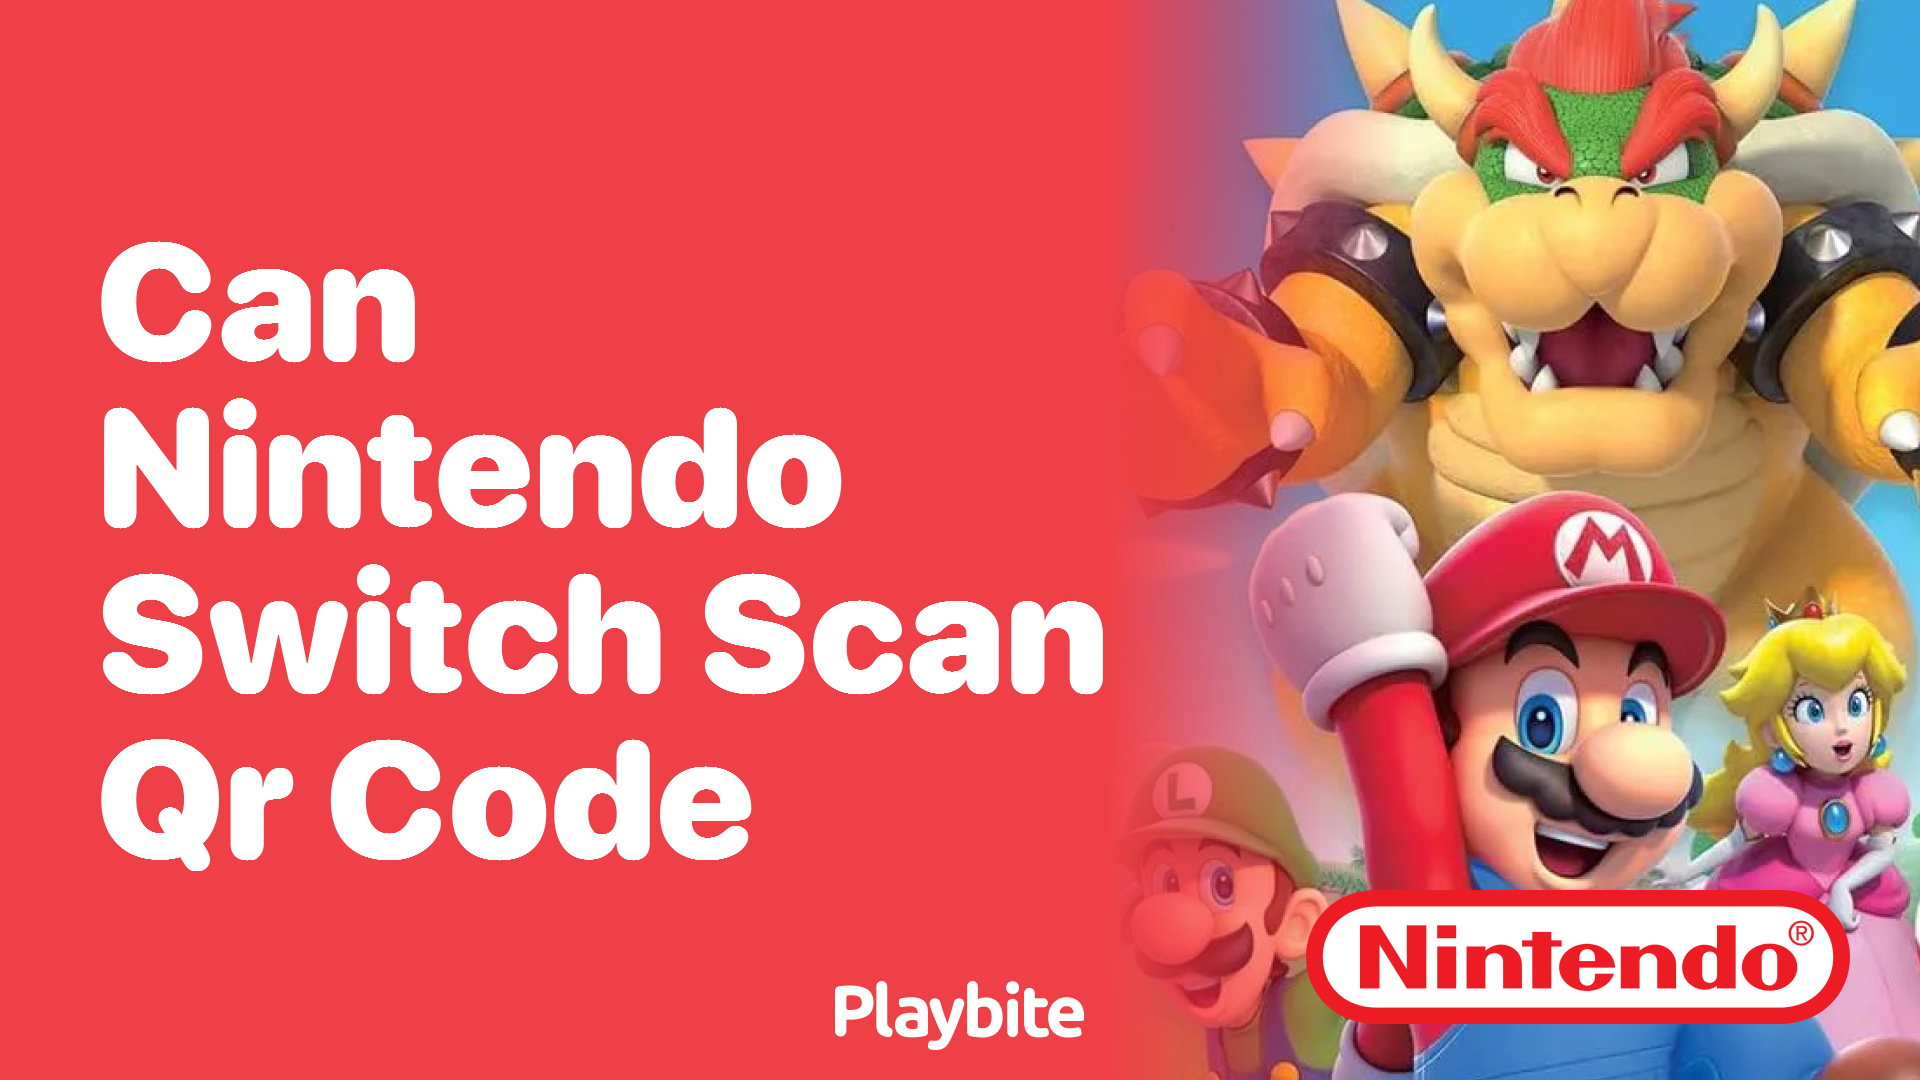 Can Nintendo Switch Scan QR Code?